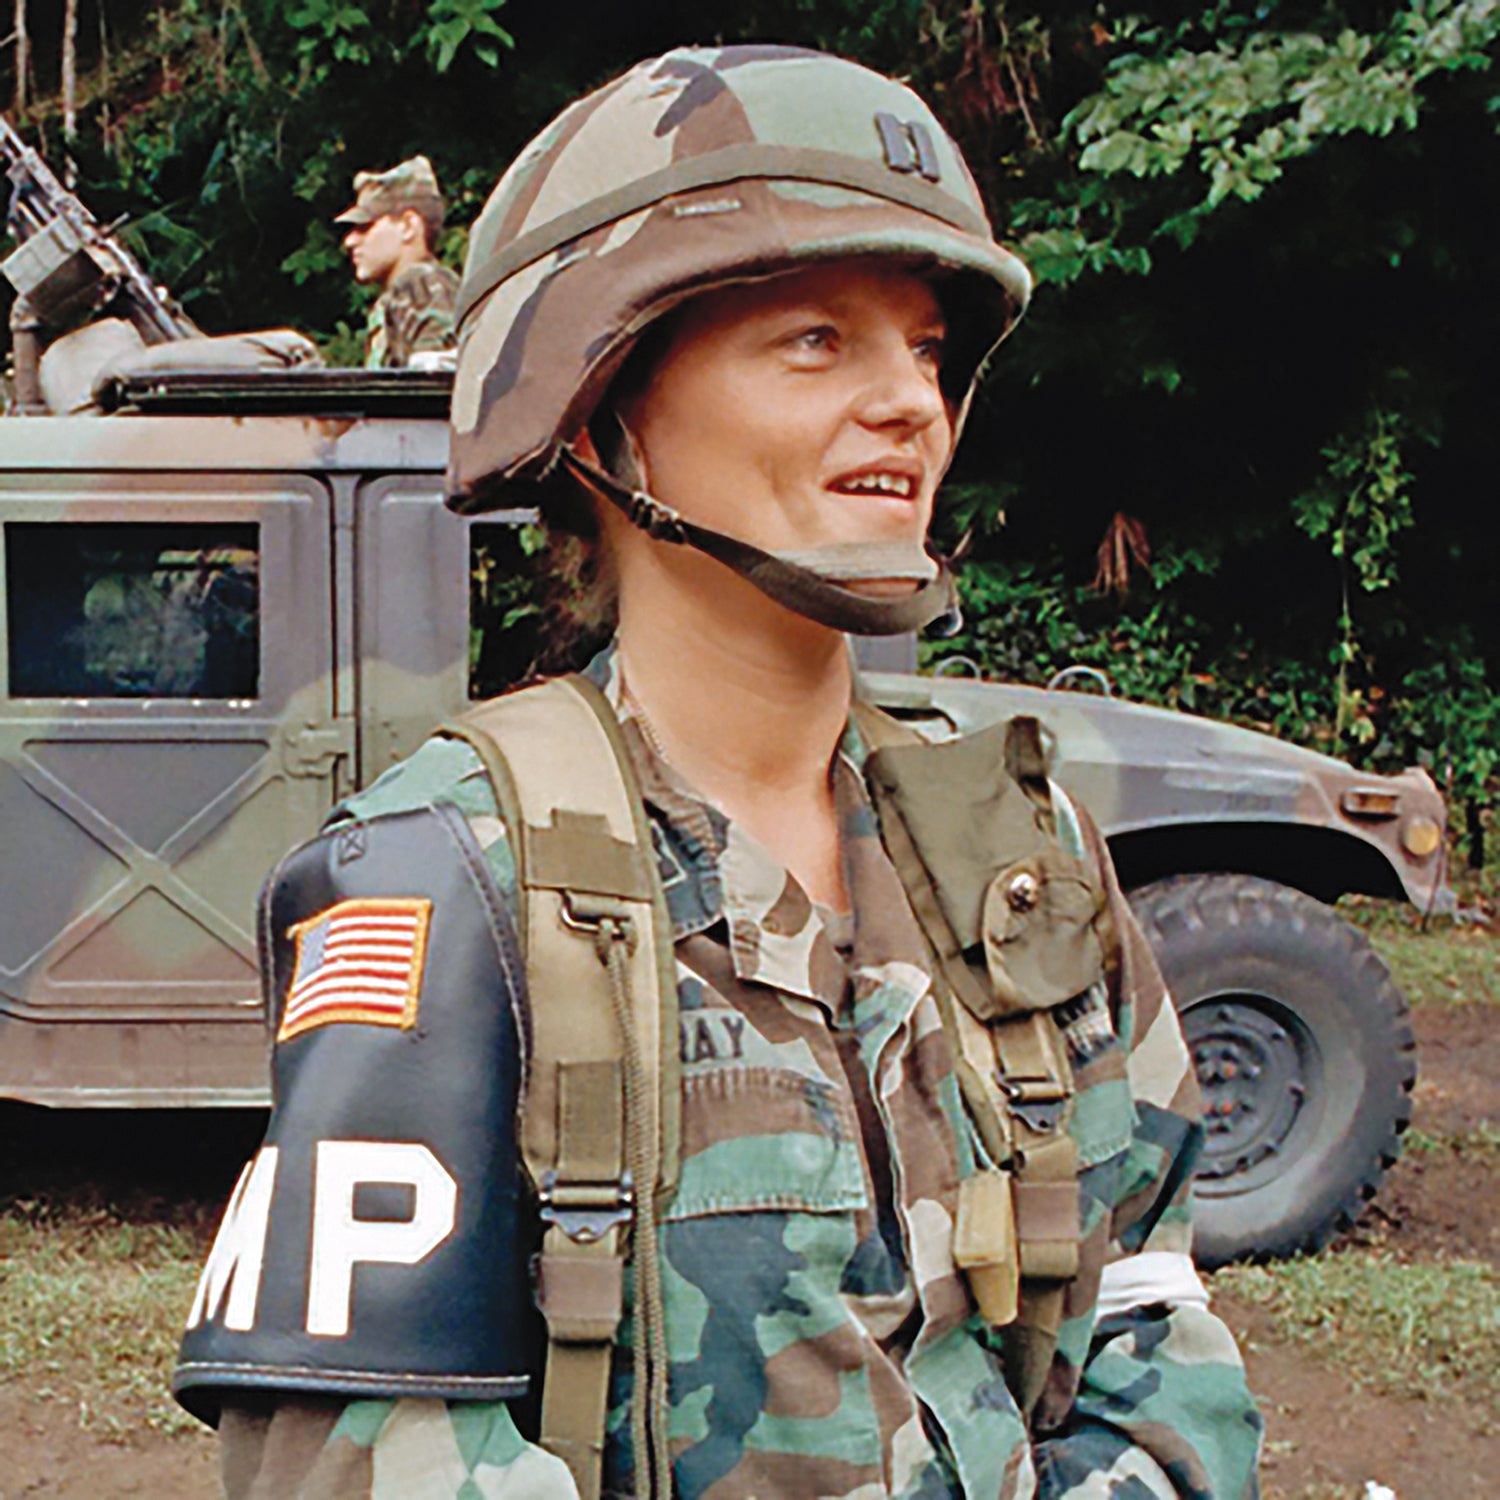 Capt. Linda Bray, commander of the 988th Military Police Company in Panama in 1990. (Credit: Wikipedia)